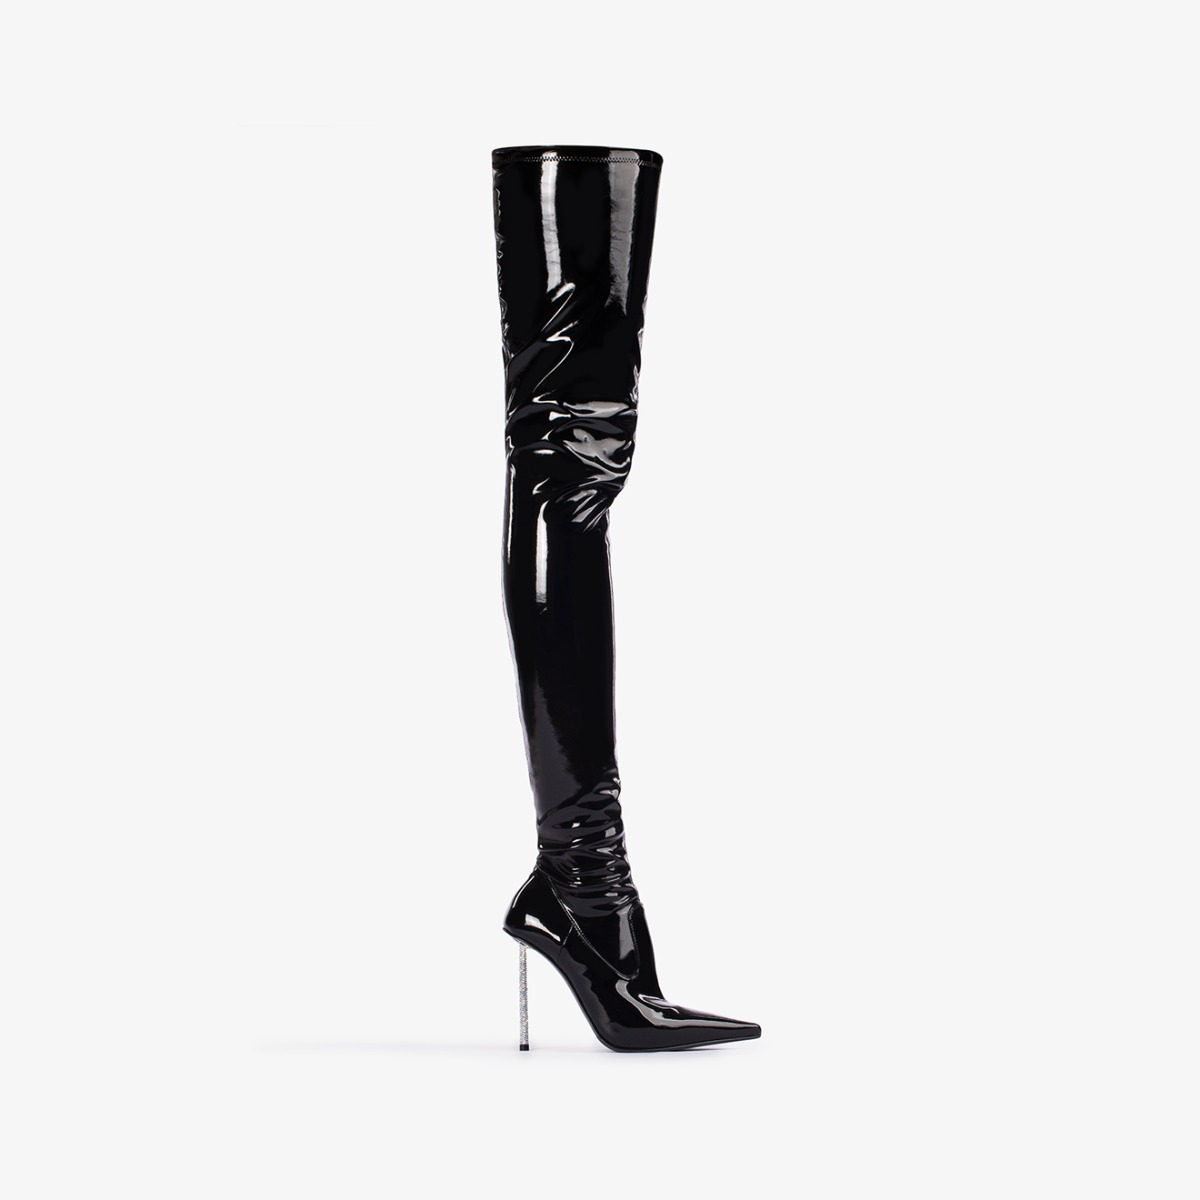 BELLA THIGH-HIGH BOOT 120 mm - Le Silla | Official Online Store